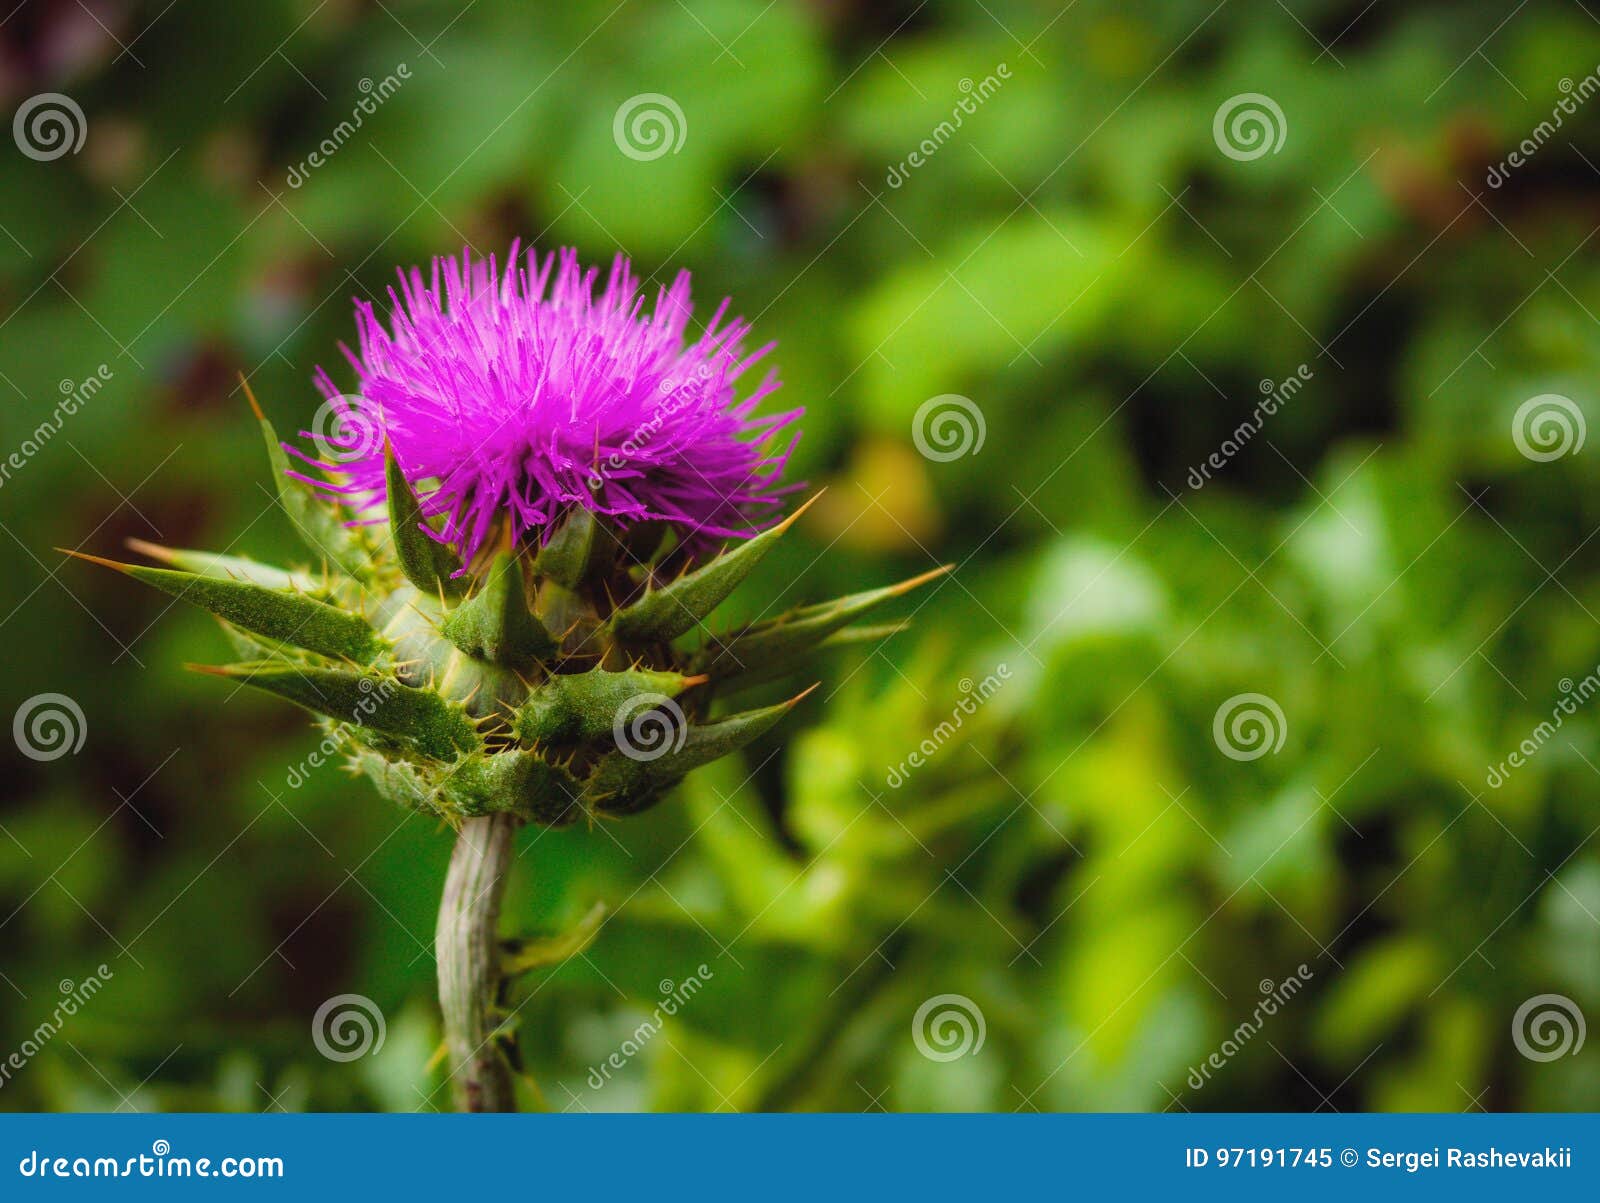 nature growth thistle